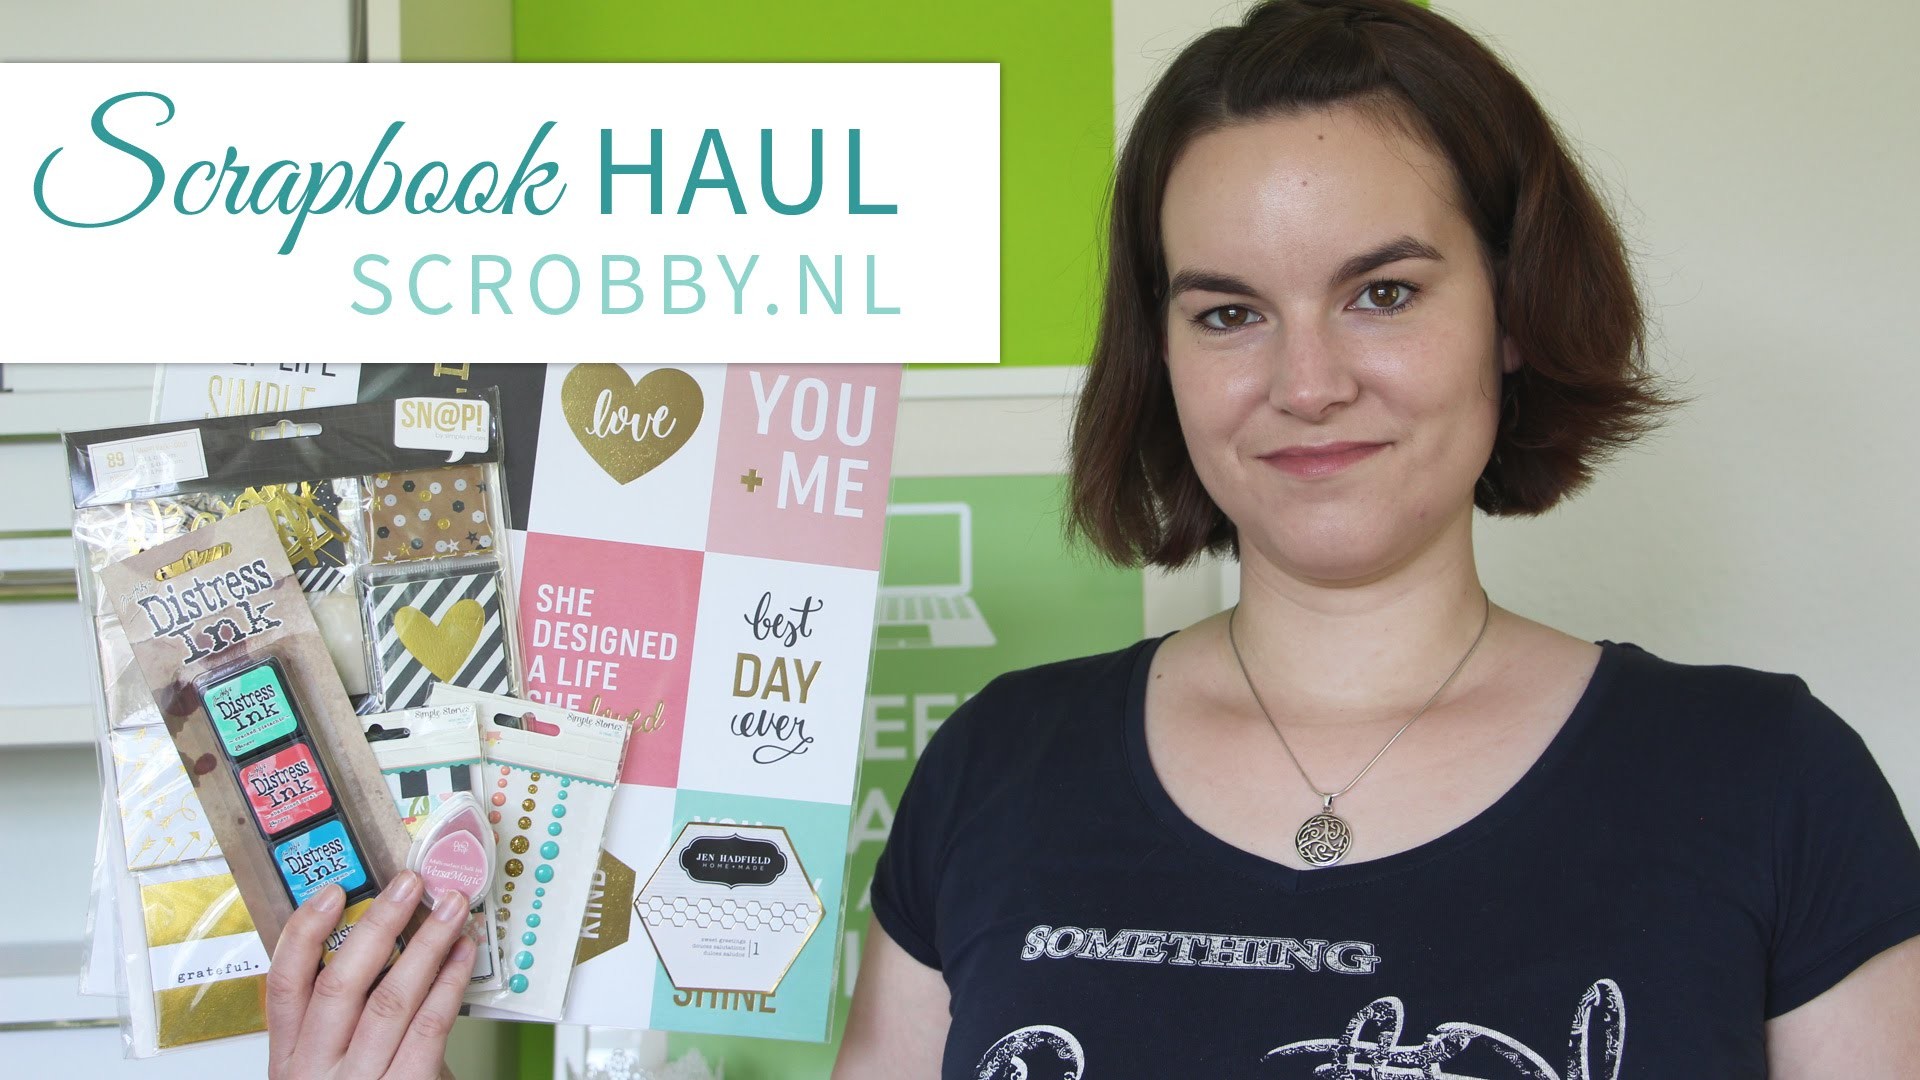 Scrapbook HAUL  ♥ scrobby | Distress Ink, Gold Foil, Project Life